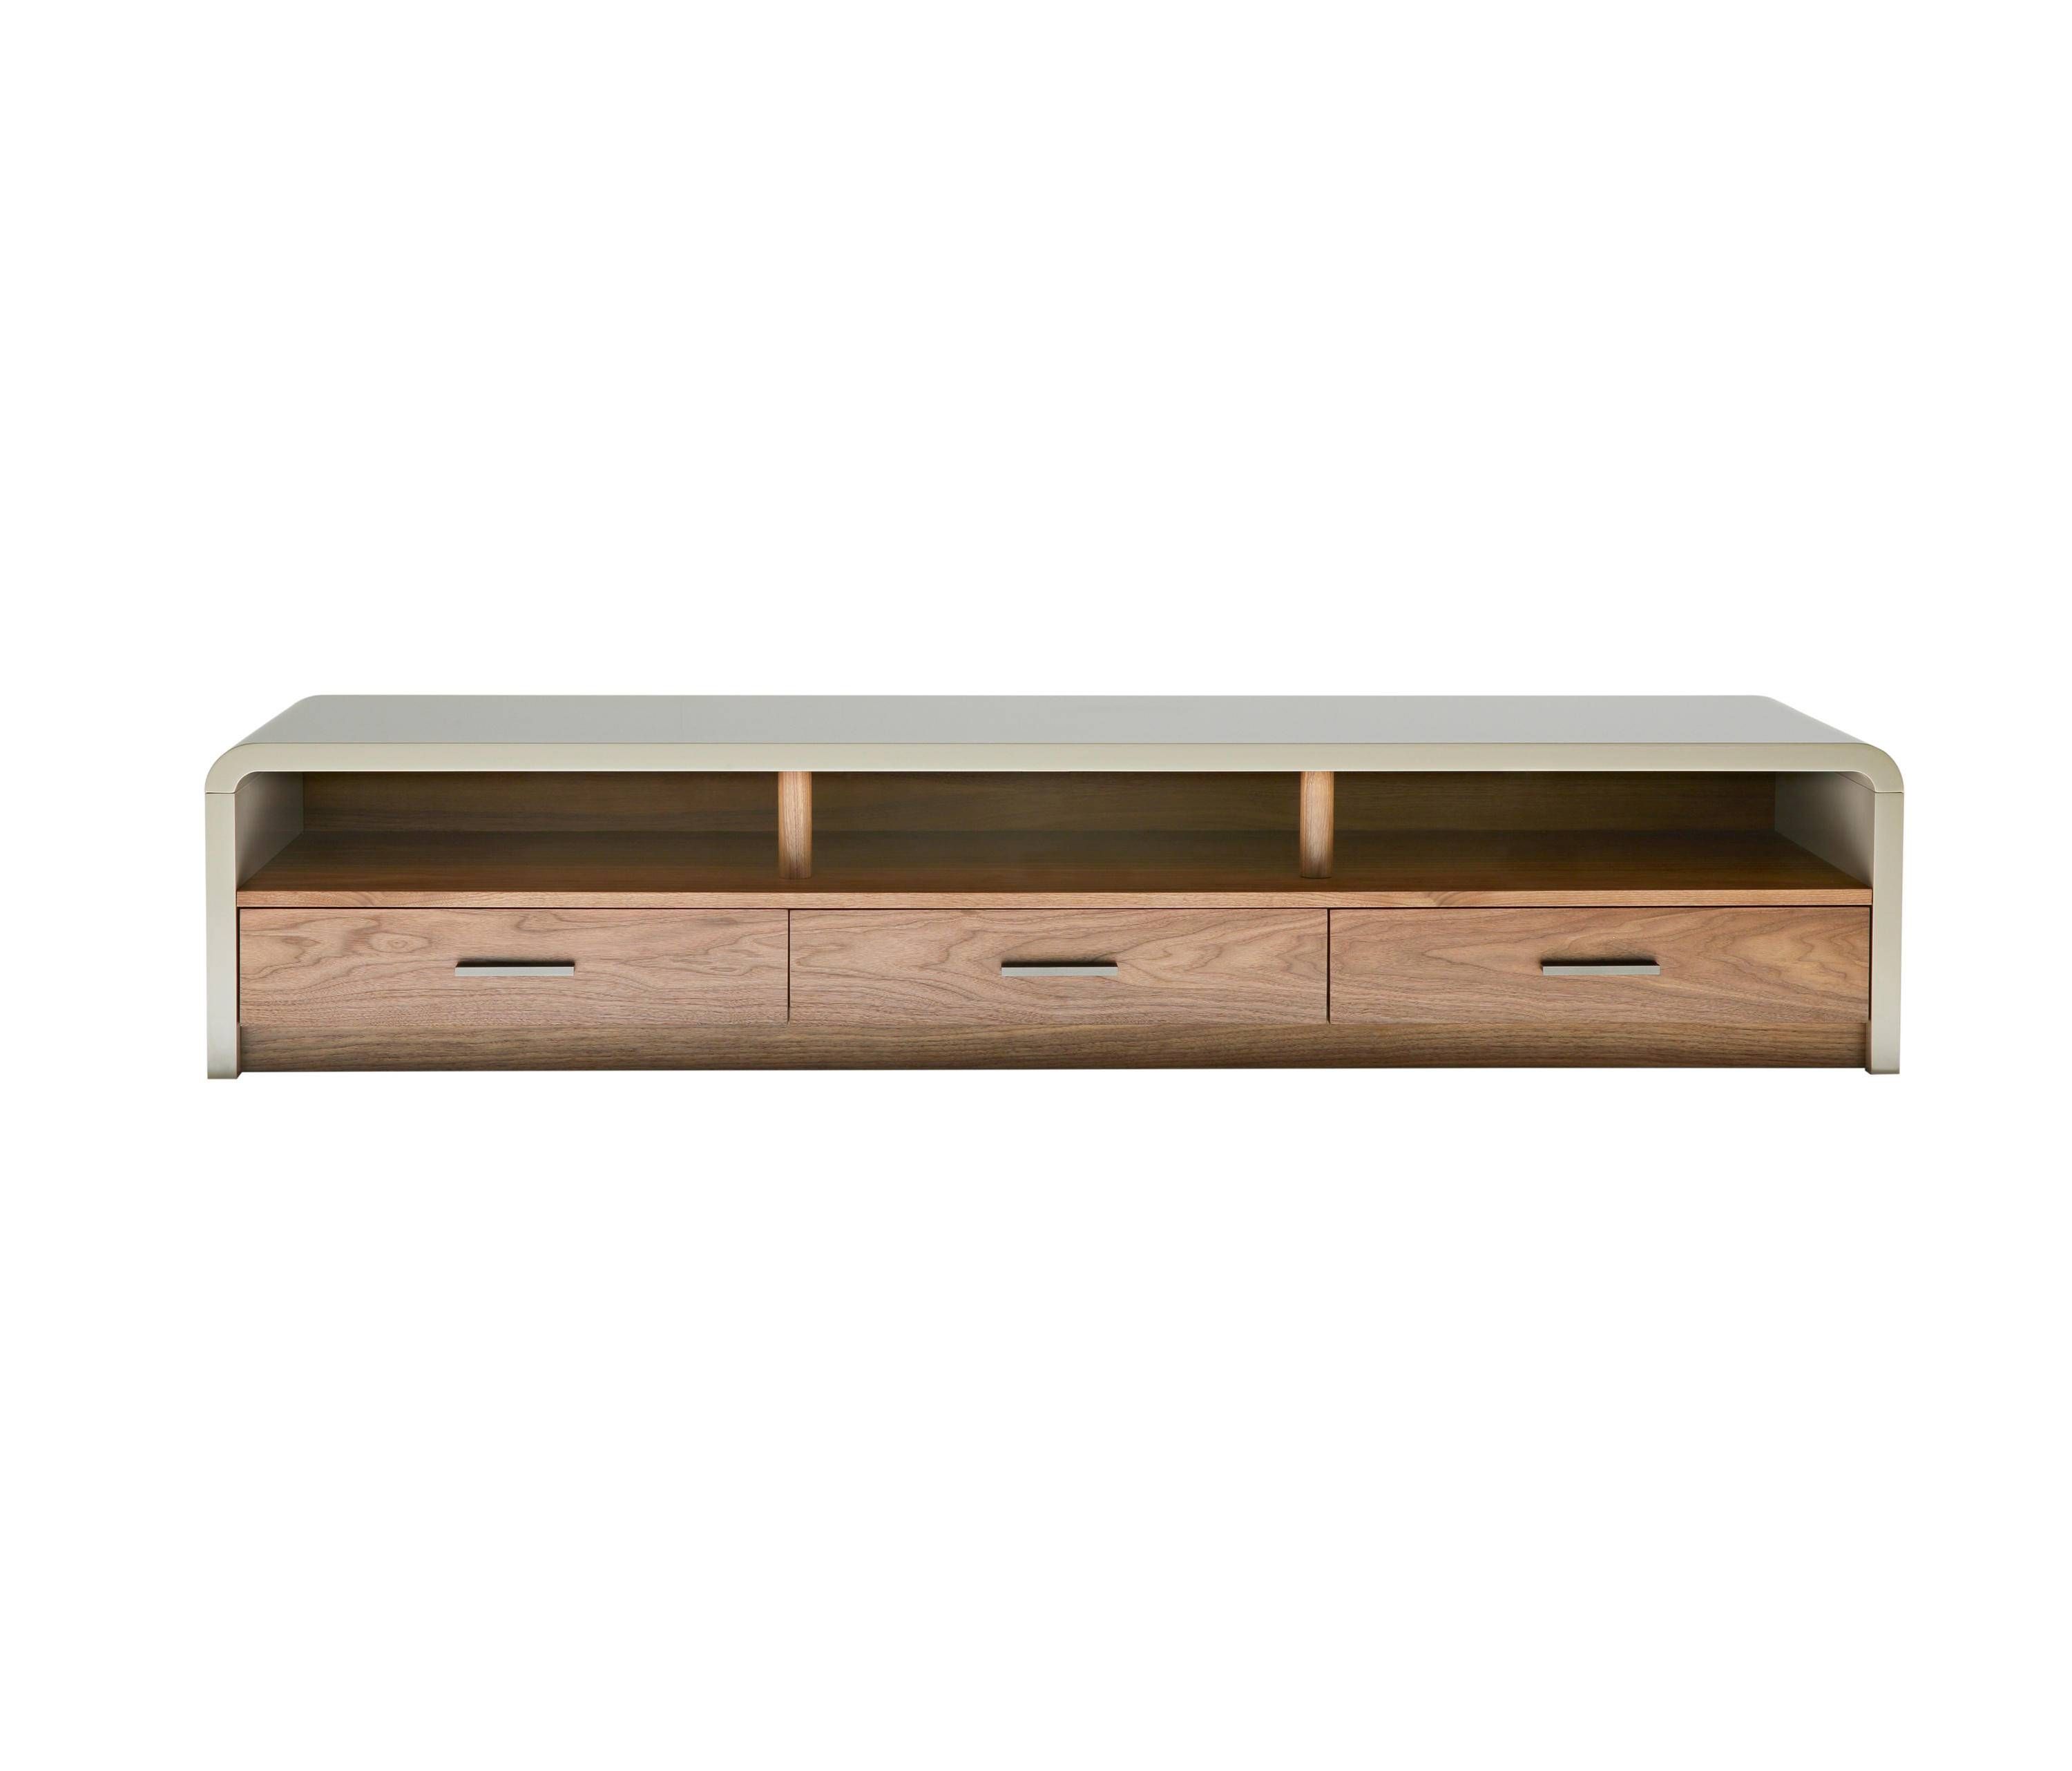 Elitis | Tv Cabinet – Multimedia Sideboards From Hc28 | Architonic Regarding Tv Sideboards (View 12 of 20)